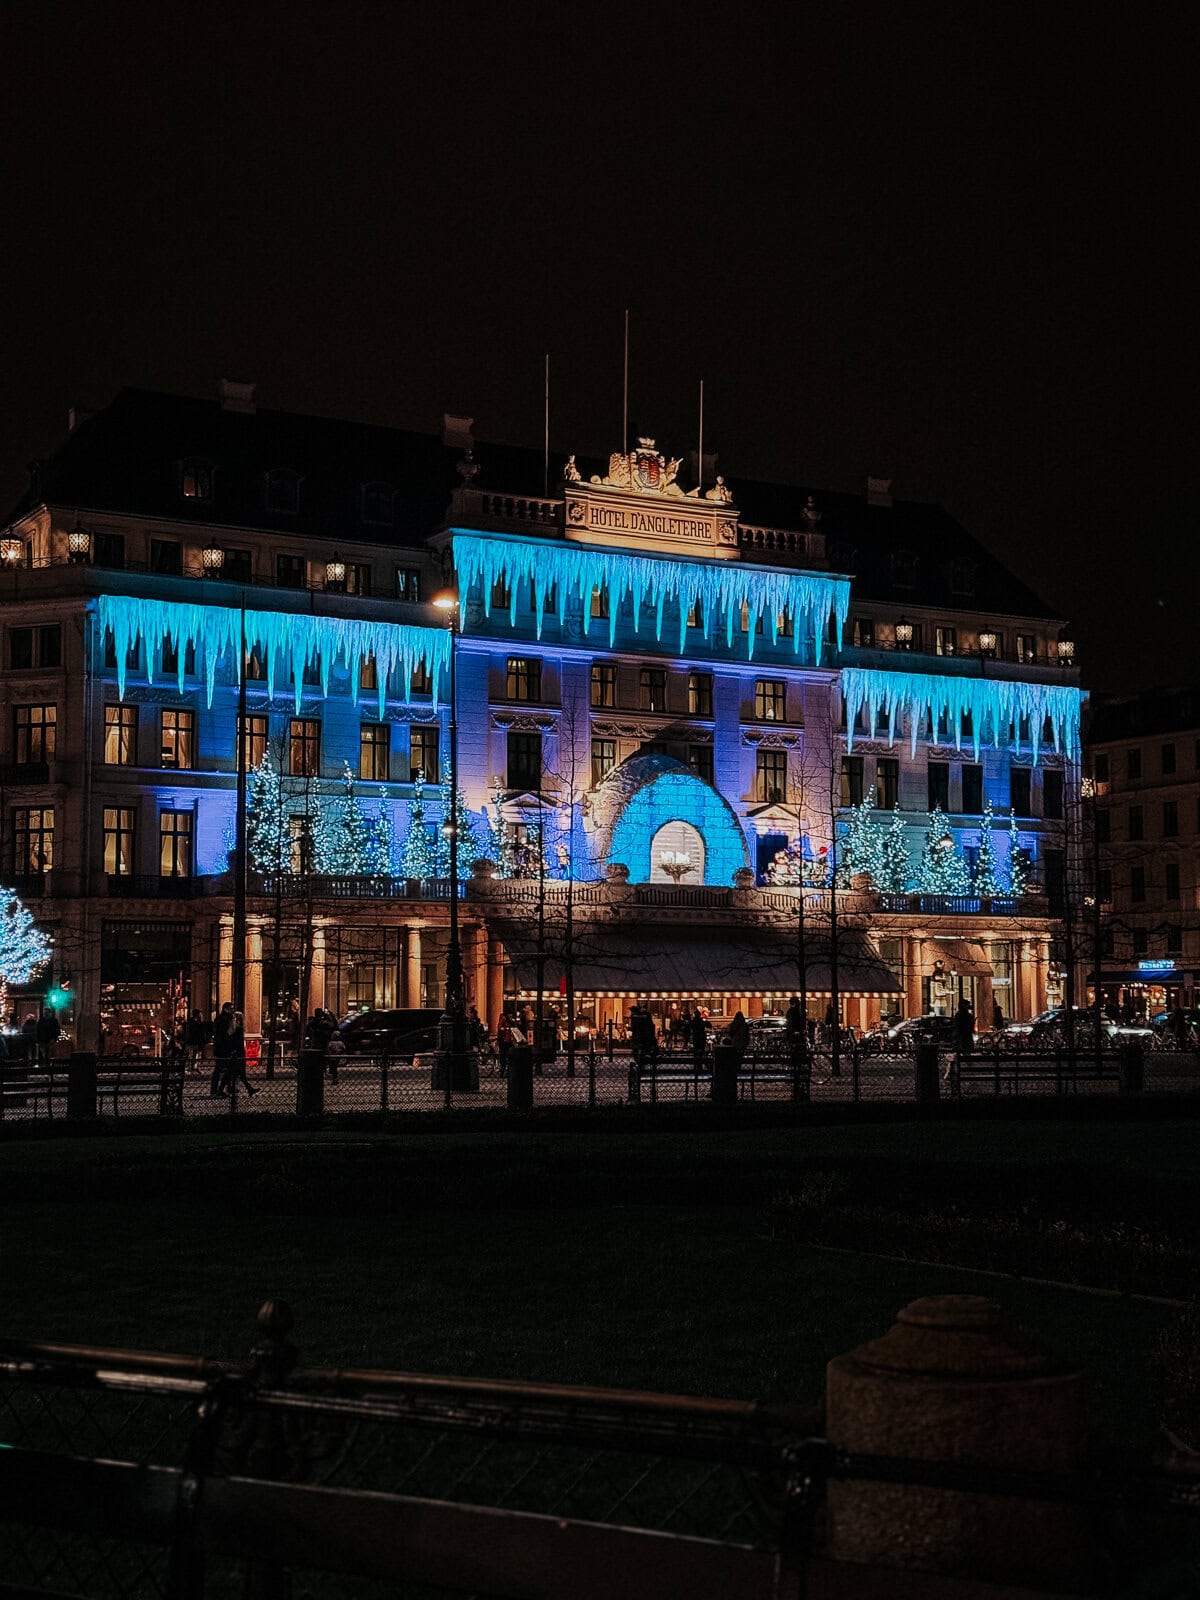 The Hotel D'Angleterre in Copenhagen lit with vibrant blue lights and ice-like decorations under a winter night sky, enhancing its grandeur and festive spirit.